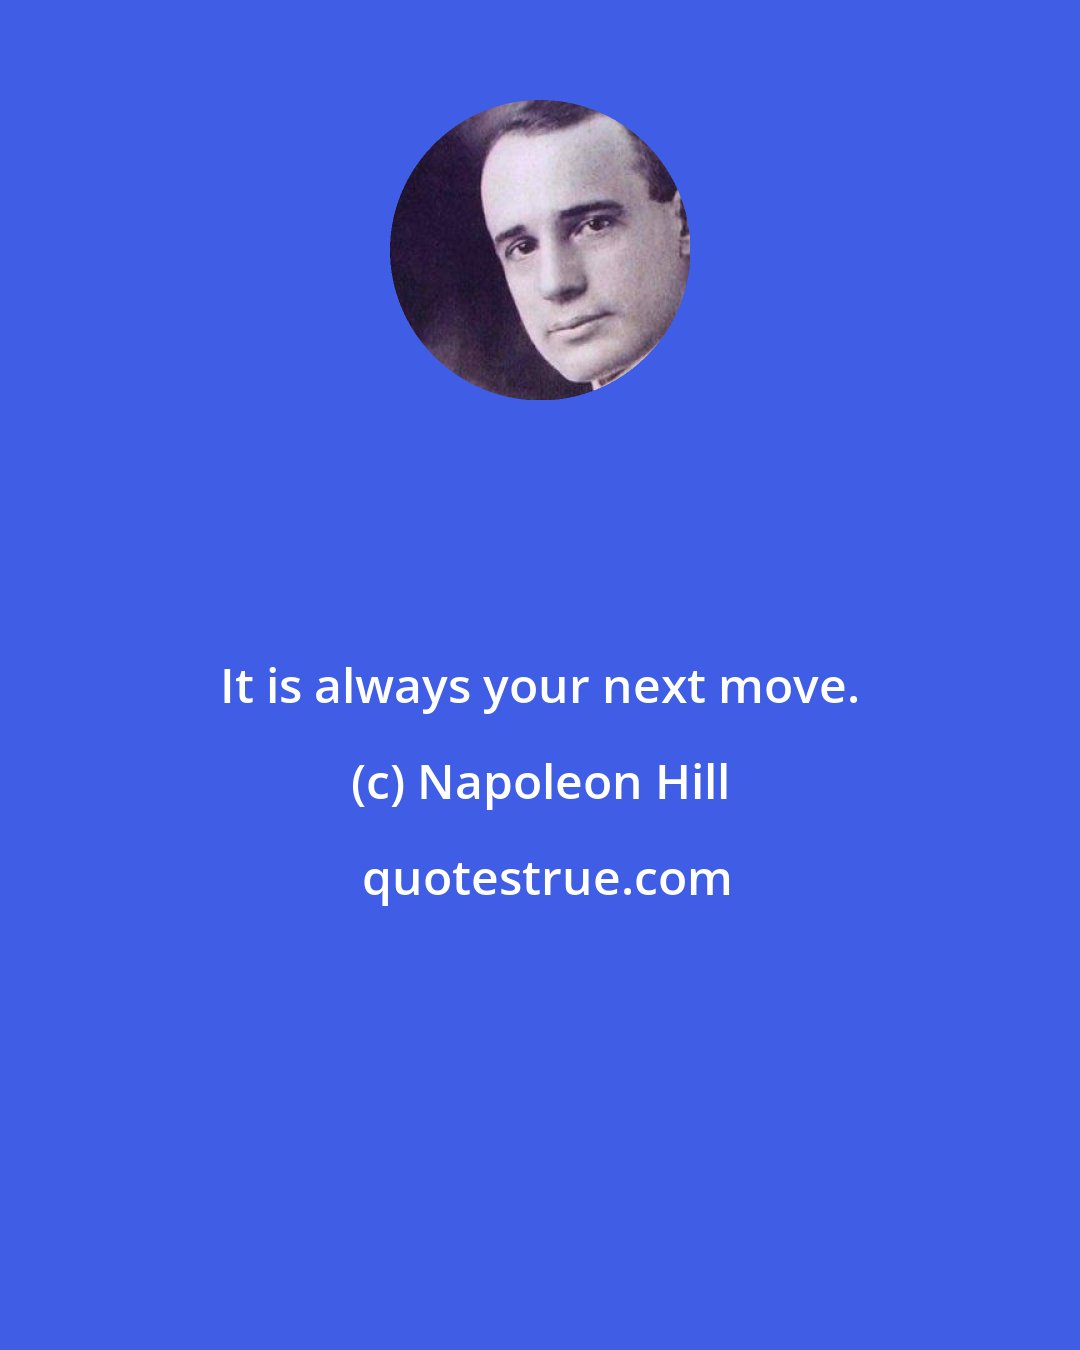 Napoleon Hill: It is always your next move.